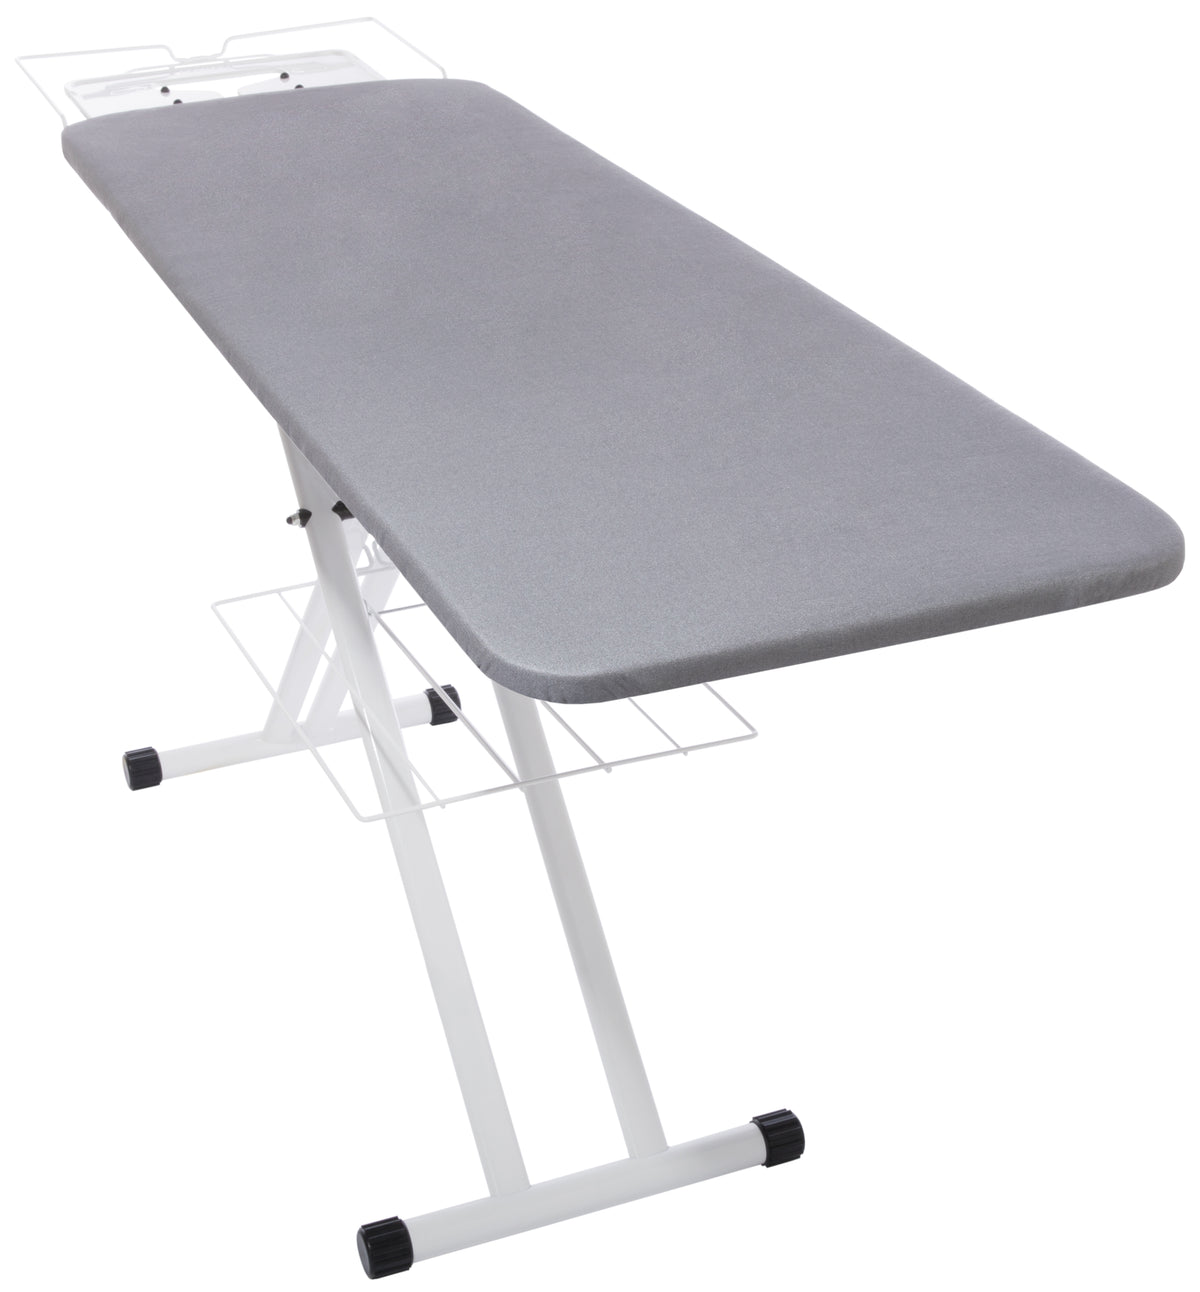 IRONING BOARD COVER MADE FOR RELIABLE 3001B IRONING BOARD